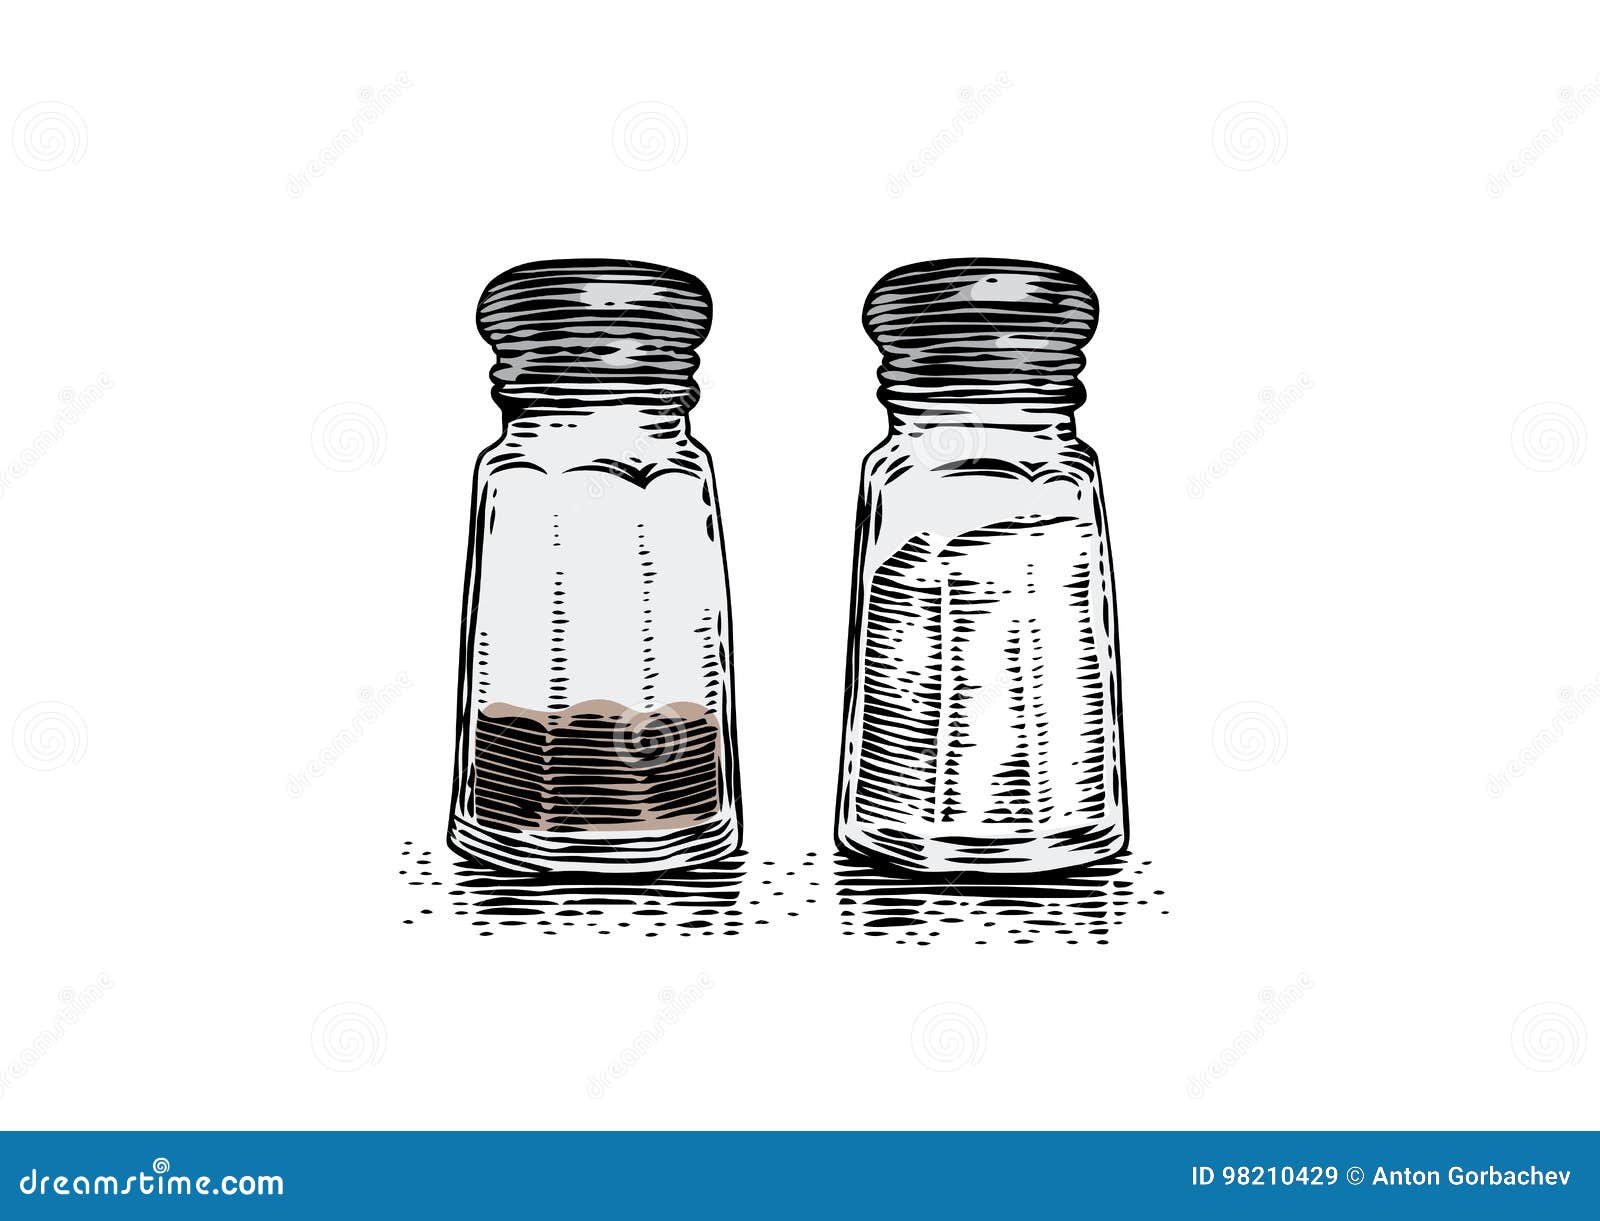 How to Draw Salt And Pepper Shakers 